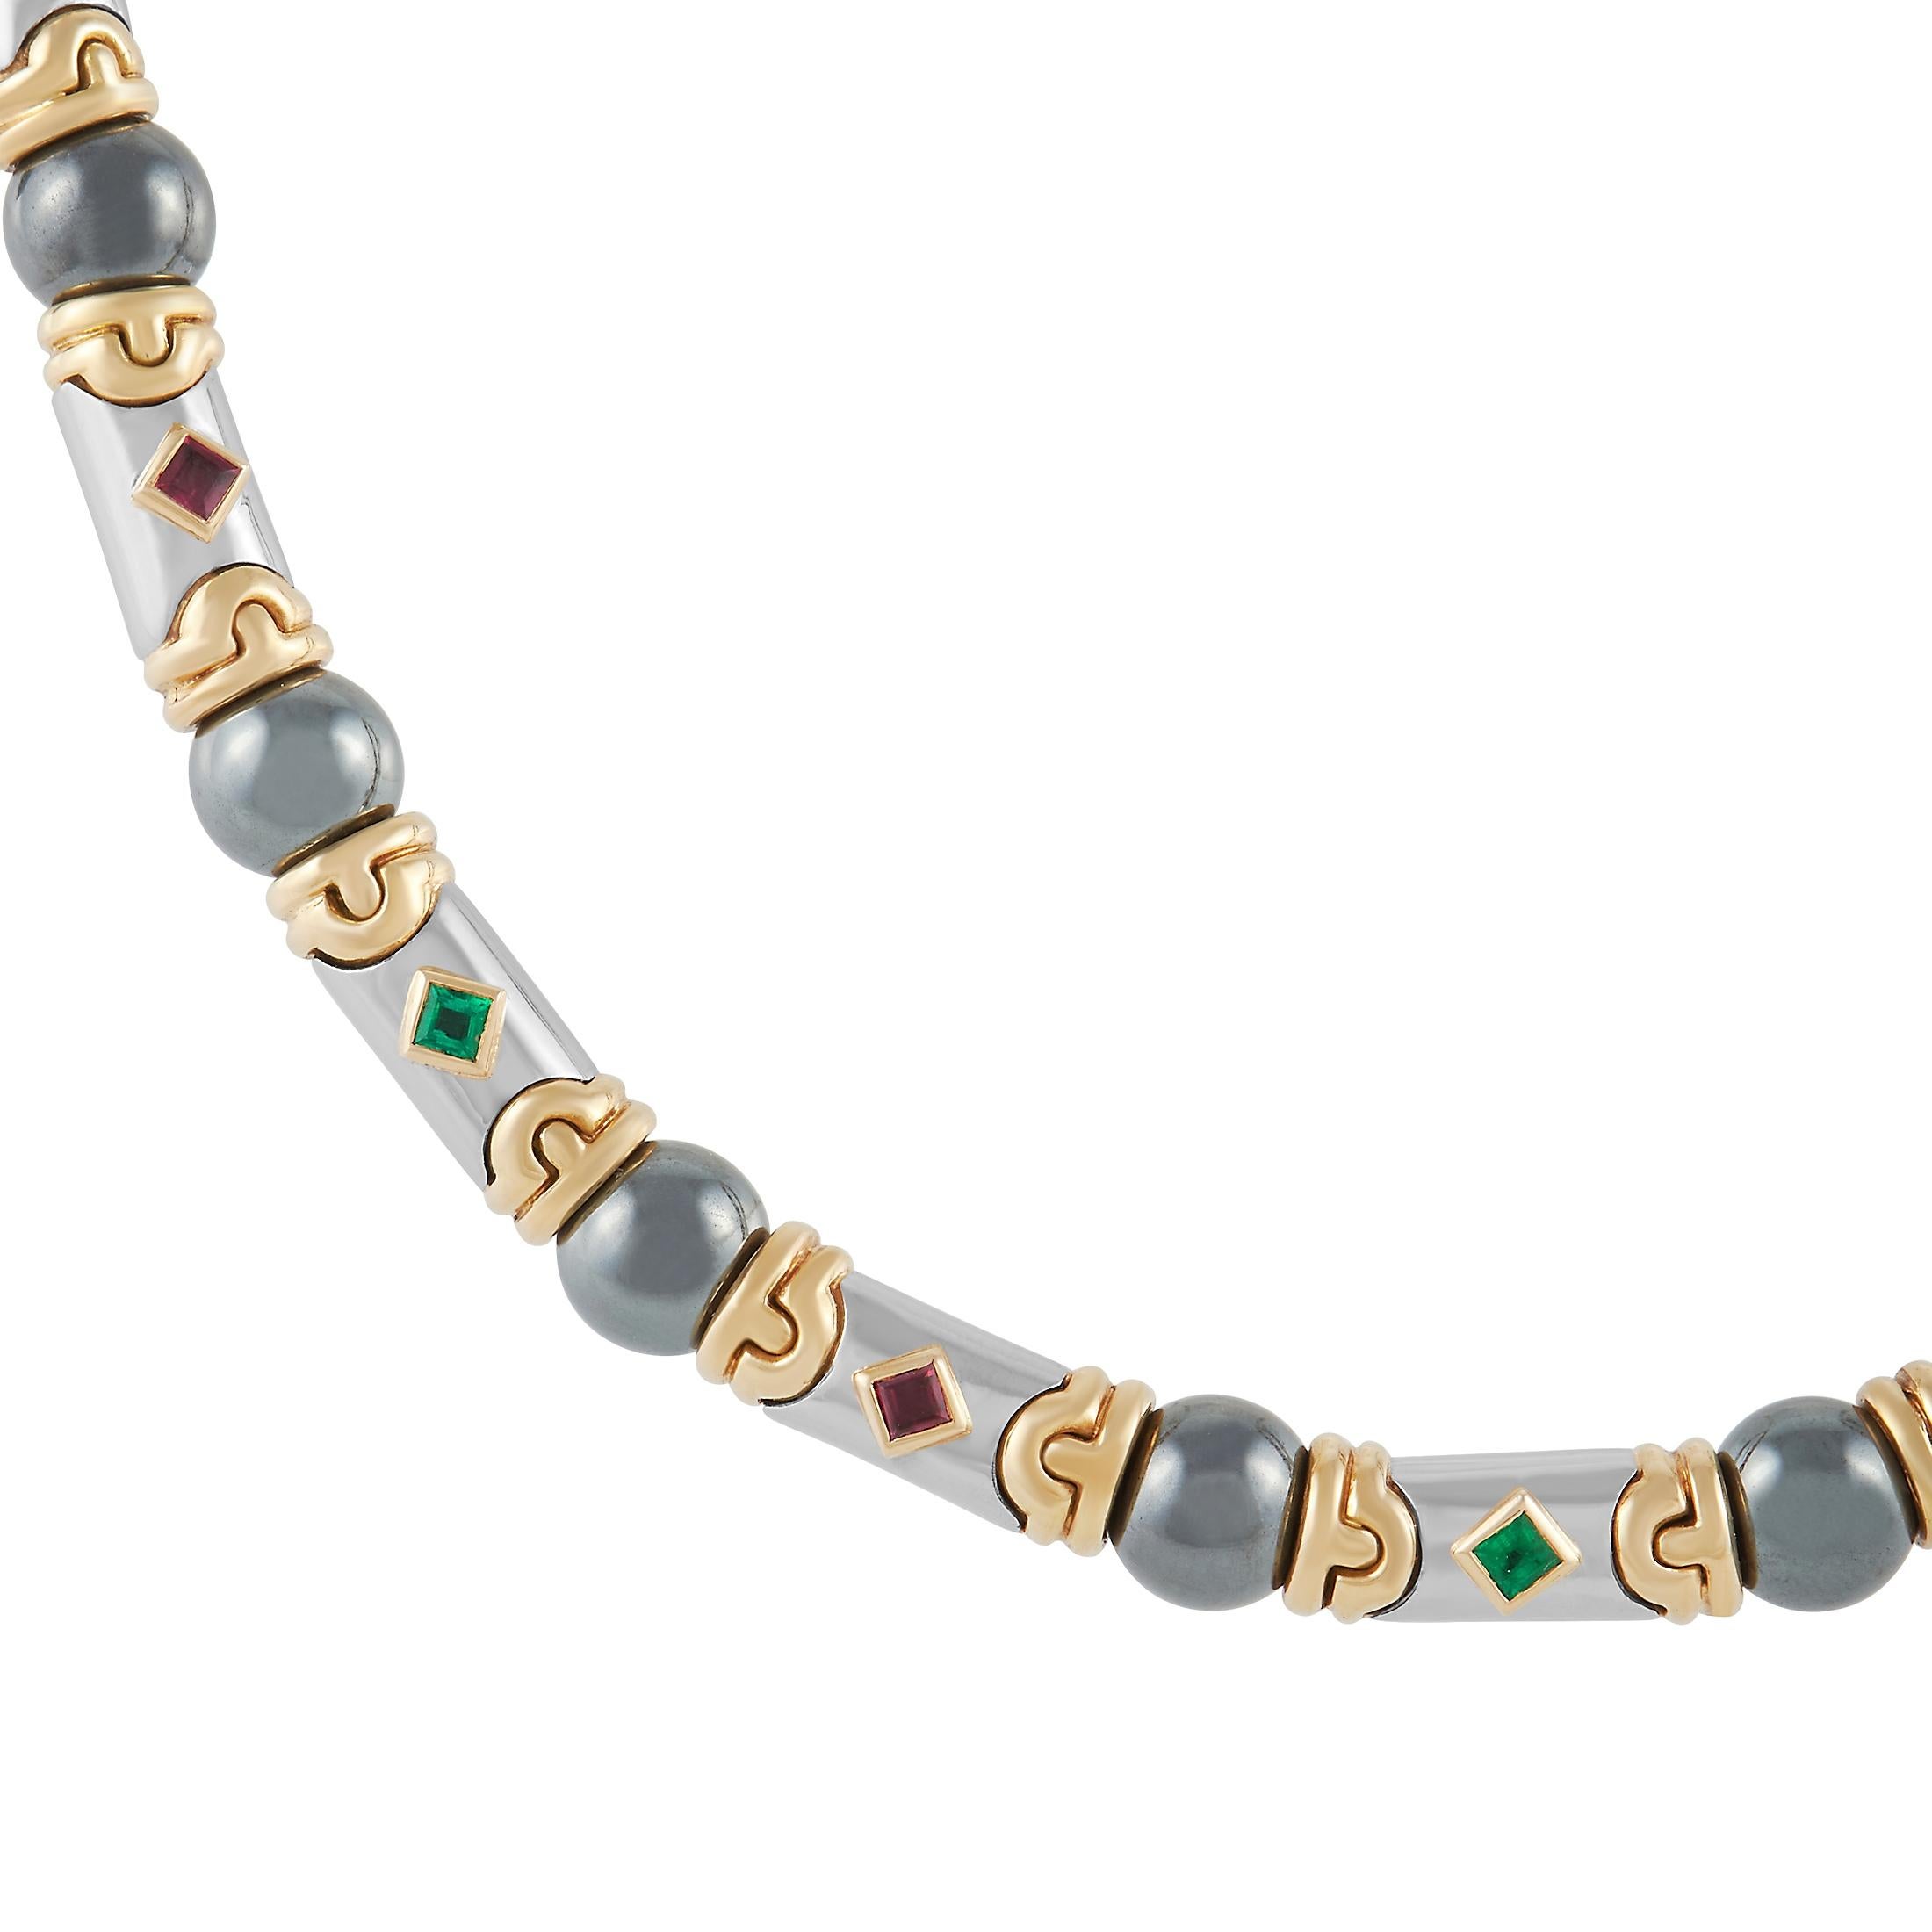 This Bvlgari necklace is both exquisite and unexpected. Measuring 15” long, this dramatic design pairs opulent 18K Yellow Gold and 18K White Gold together flawlessly. Dazzling hematite beads give it an obvious sense of structure, but it’s the ruby